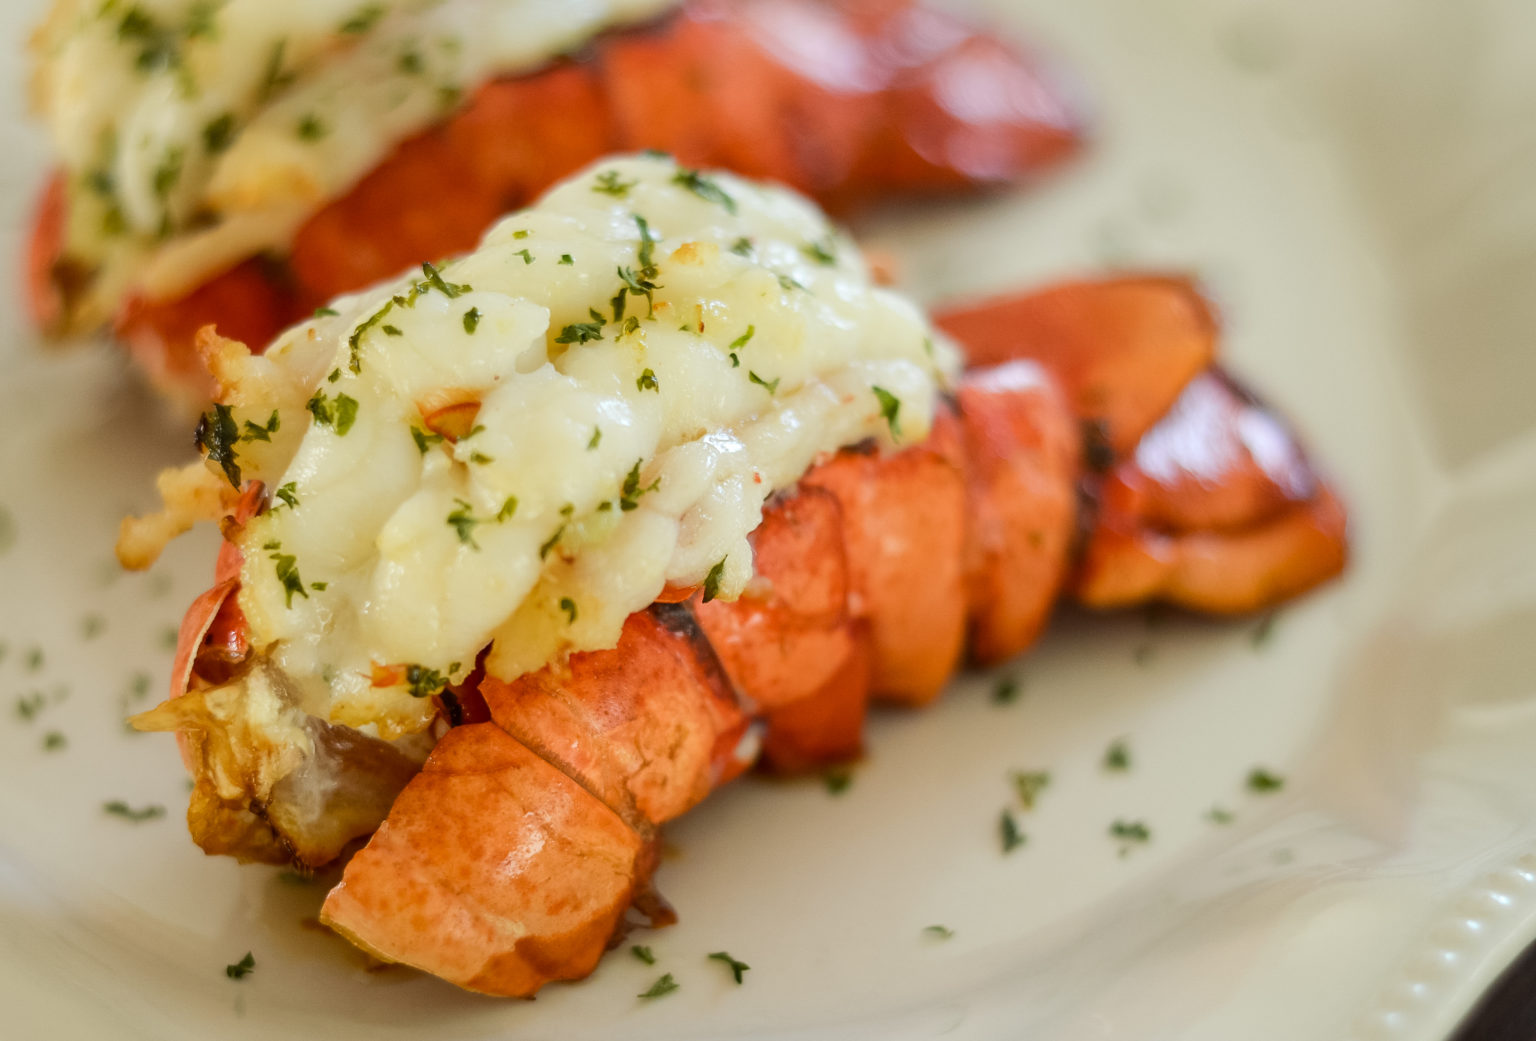 Ninja Foodi Grilled Lobster Tail - Mommy Hates Cooking